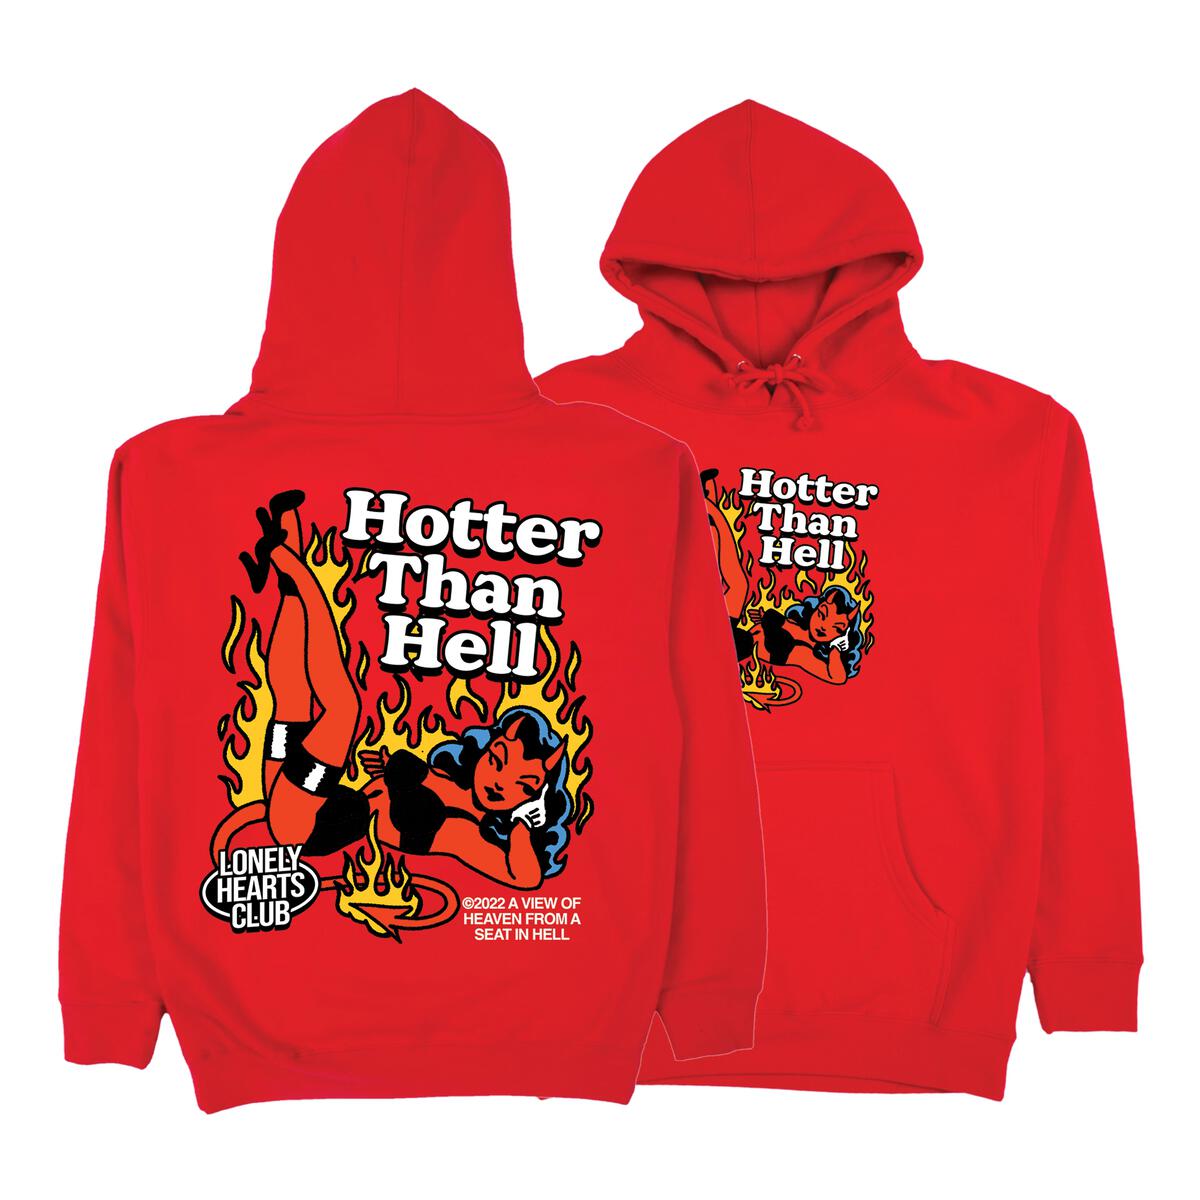 Lonely Hearts Hotter than Hell Hoodie Red